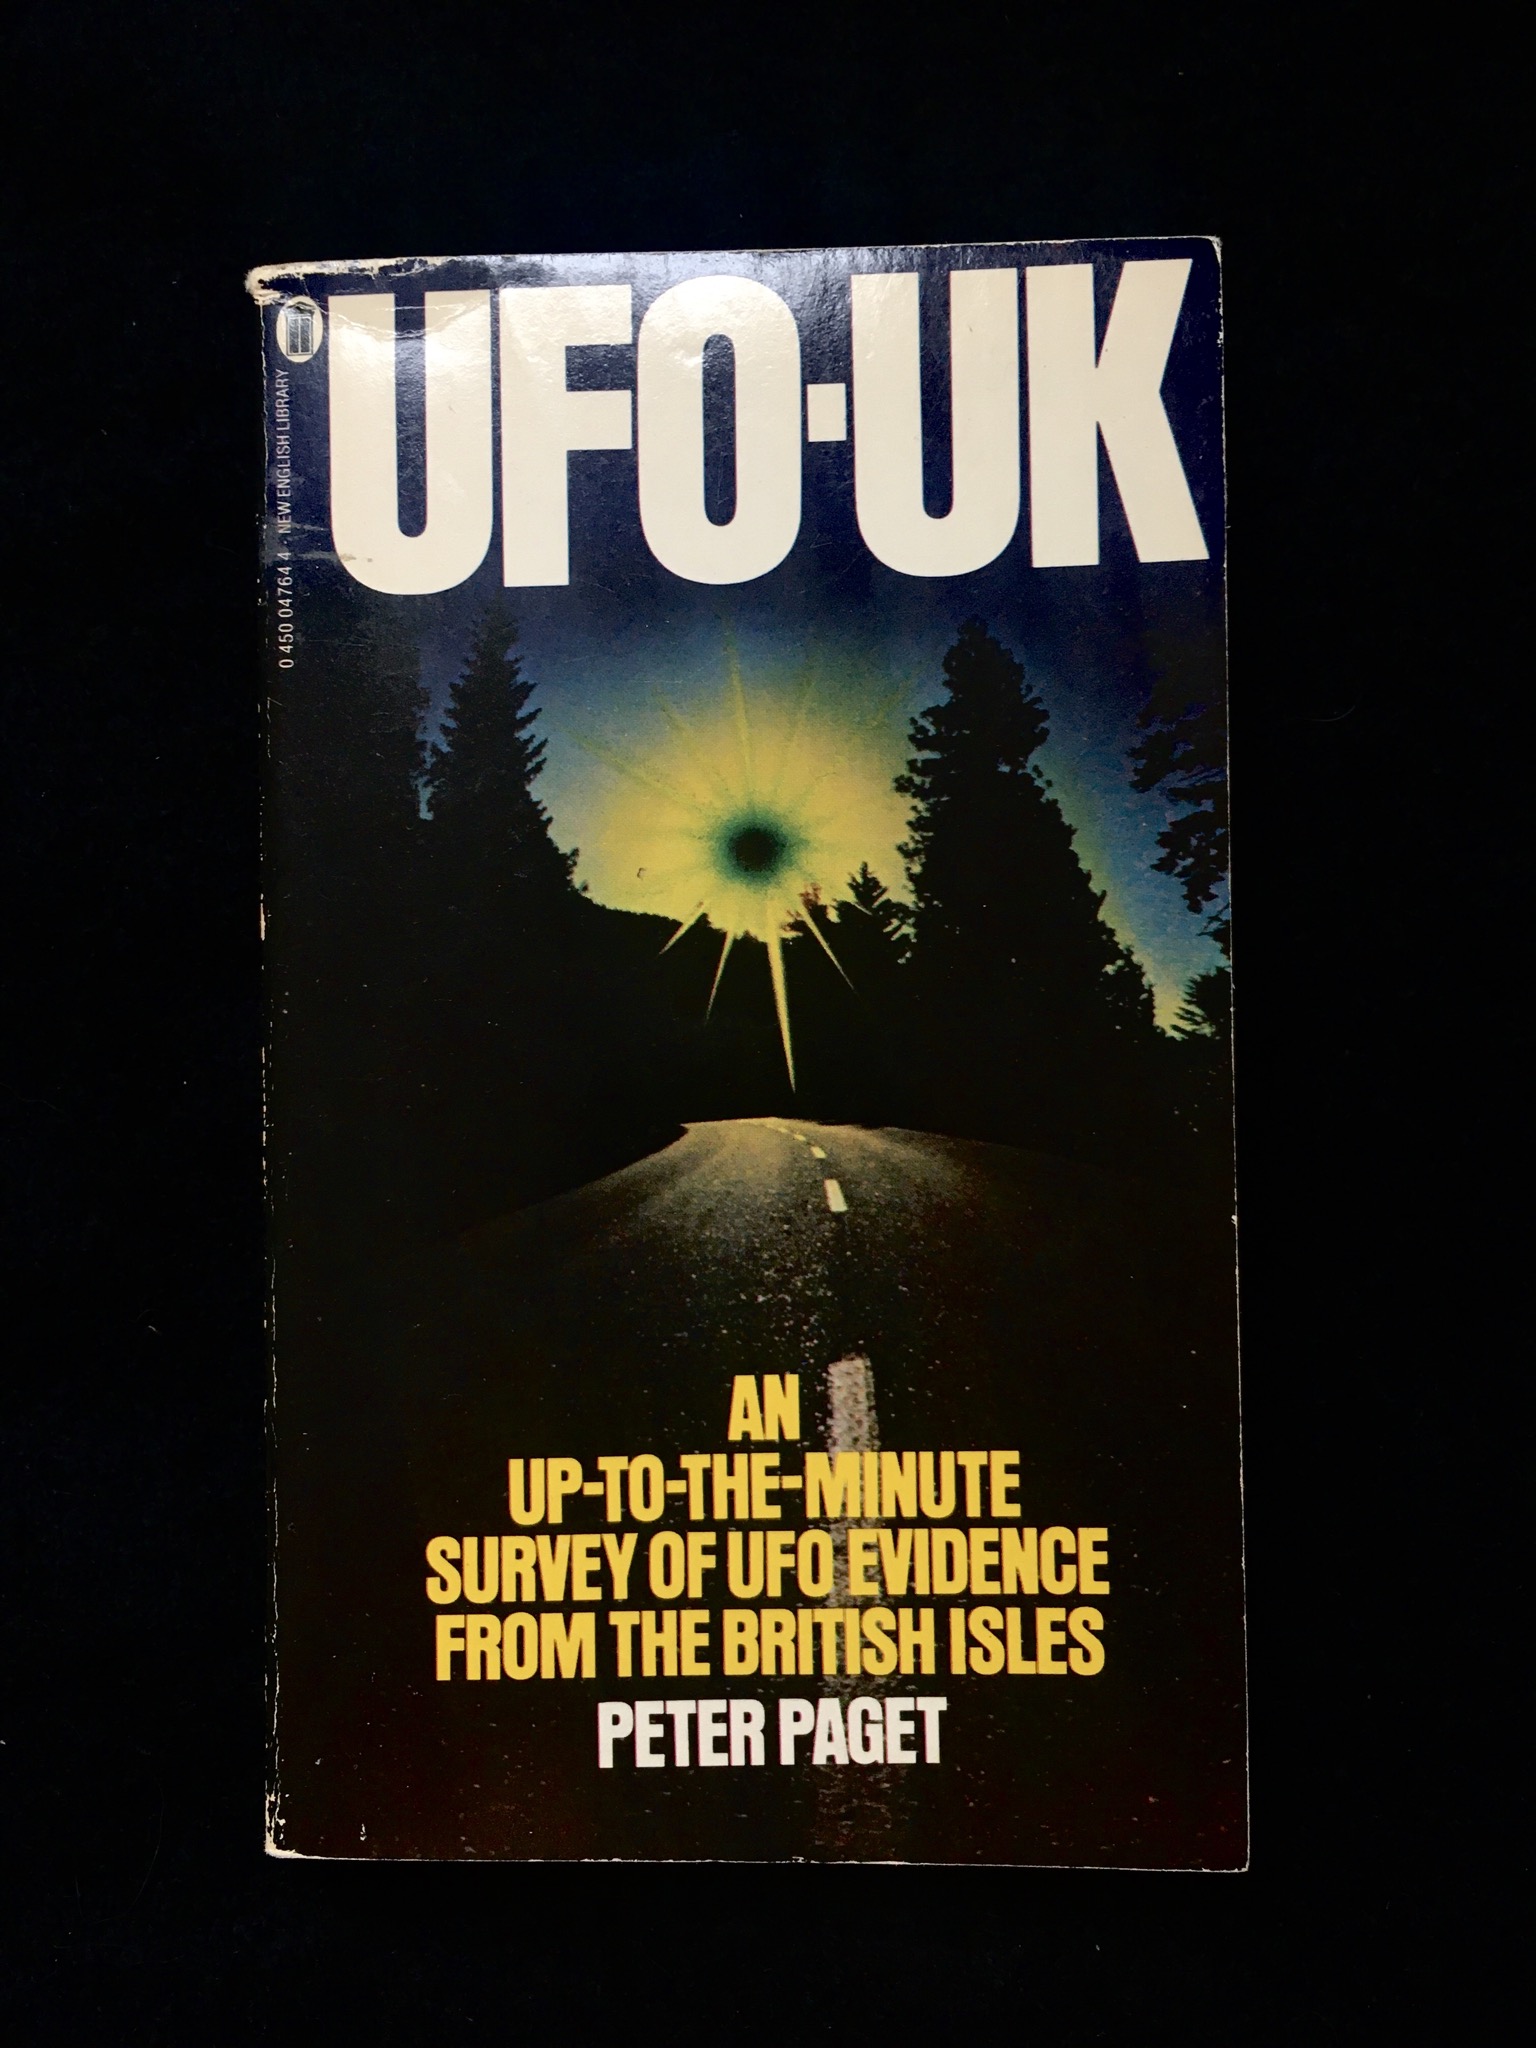 UFO-UK by Peter Paget